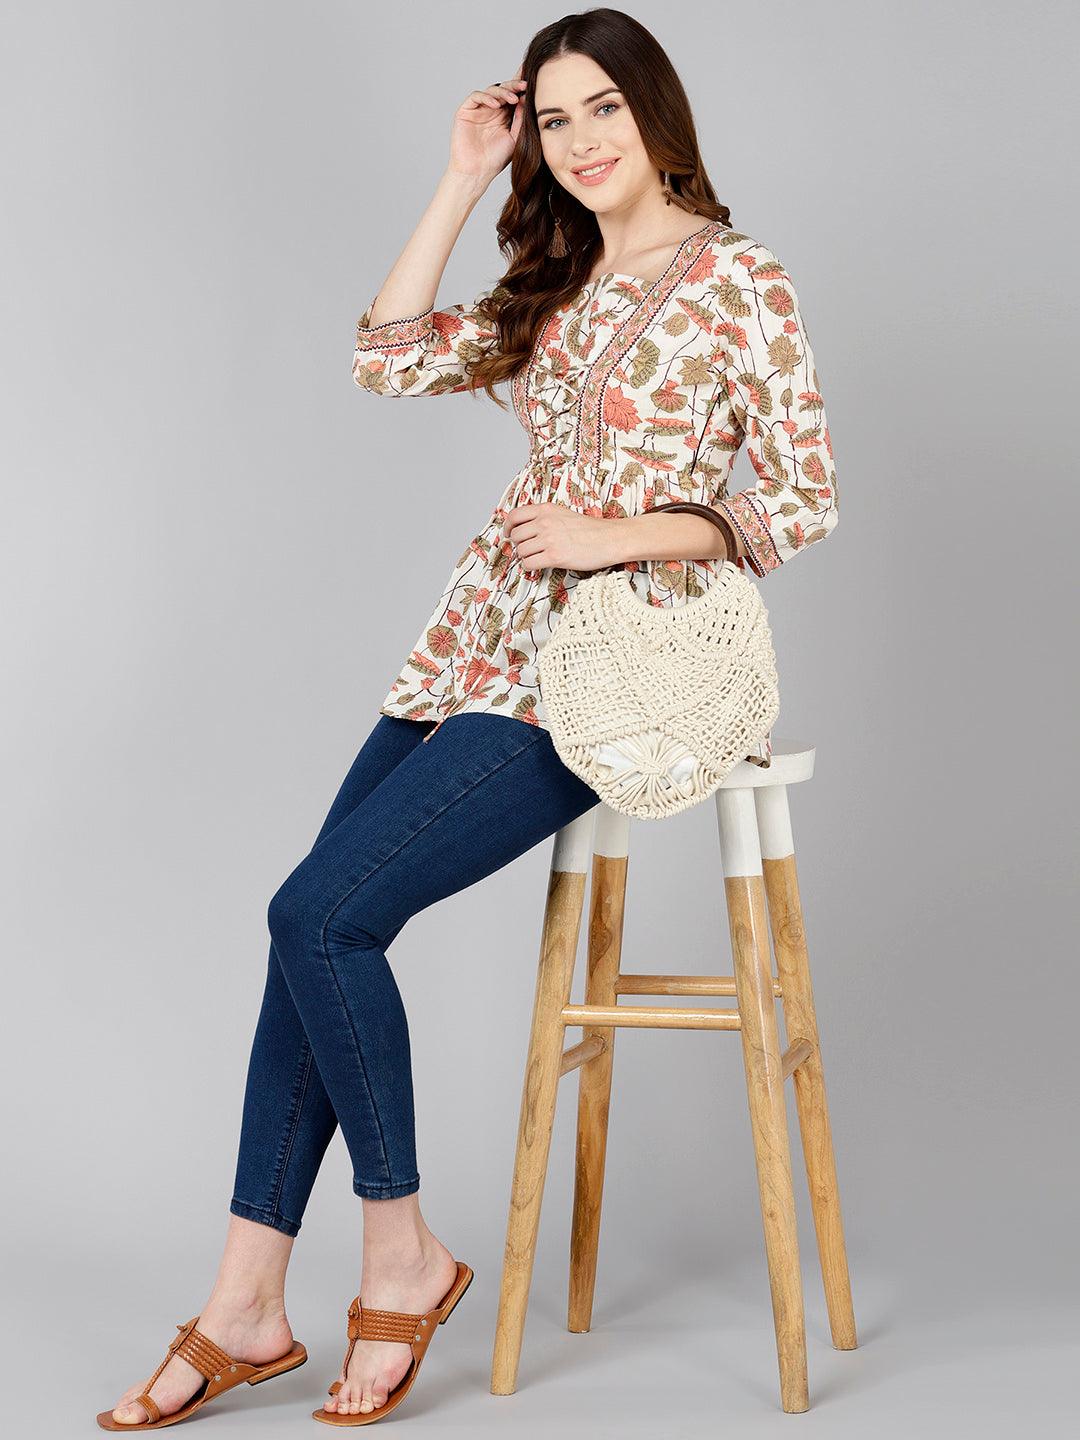 Floral Printed Cream Cotton Top - Znxclothing